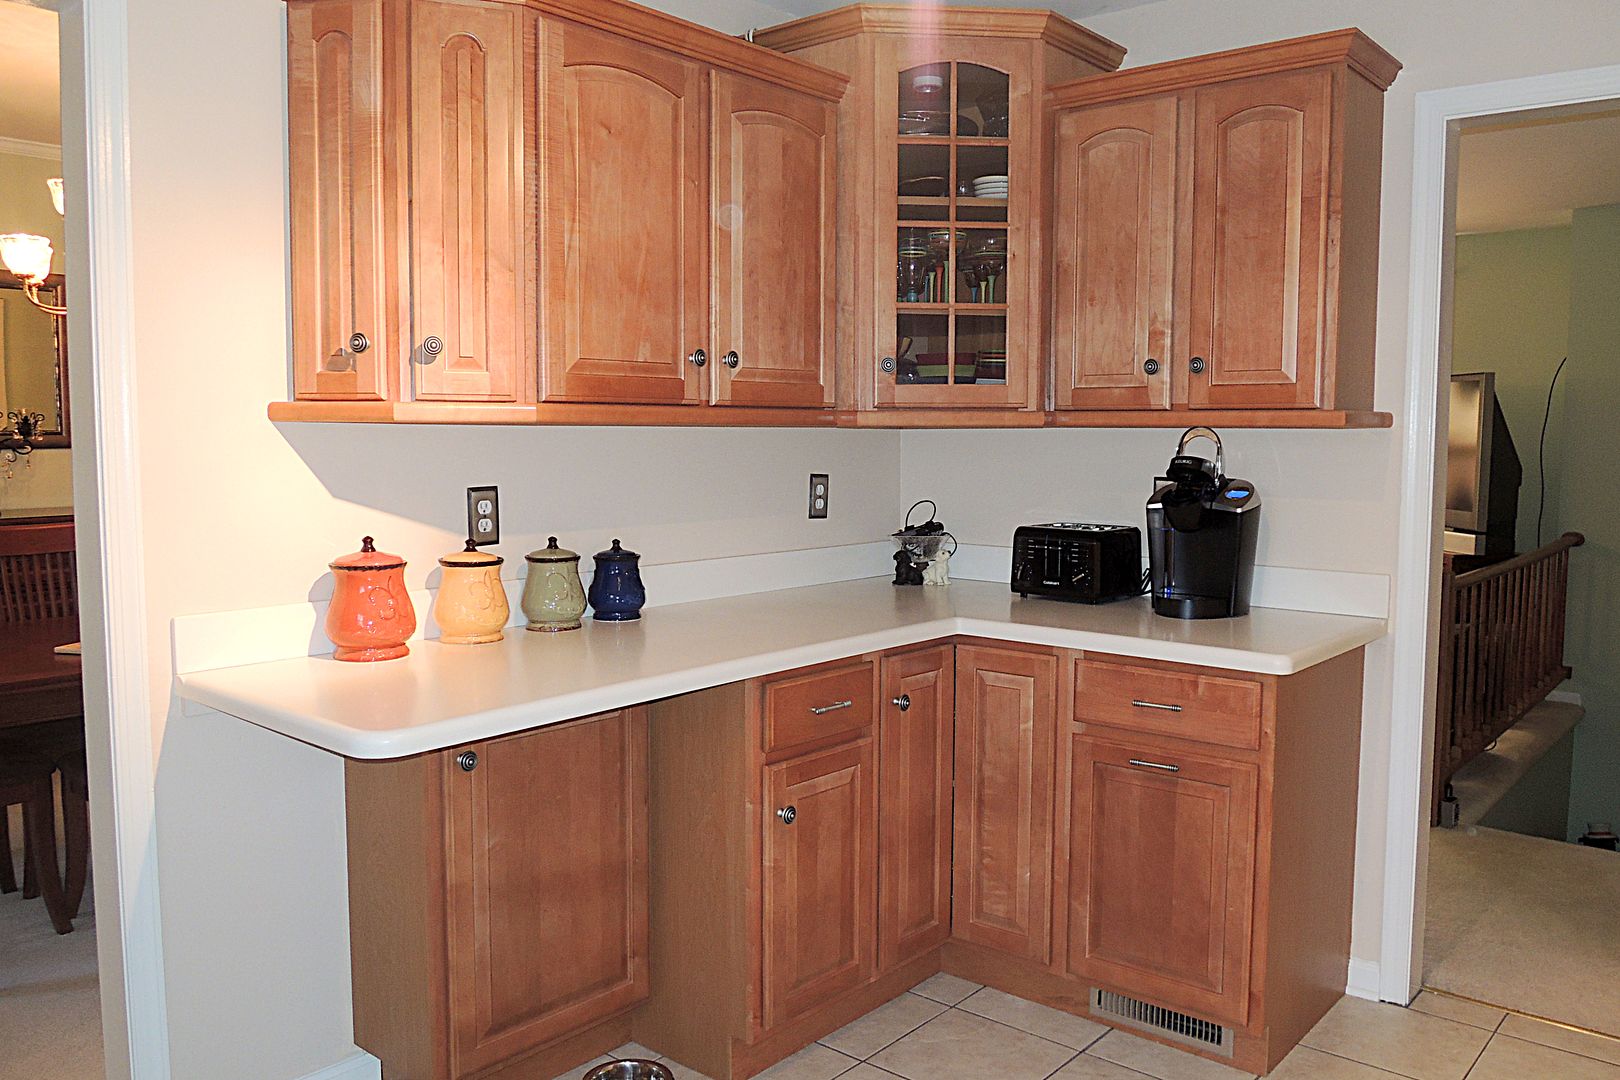 Maple Cabinets and an Updated Kitchen in this Affordable La Plata Home for Sale in Mariellen Park.  Real Estate Sales by Marie Lally of O'Brien Realty of Southern Maryland.